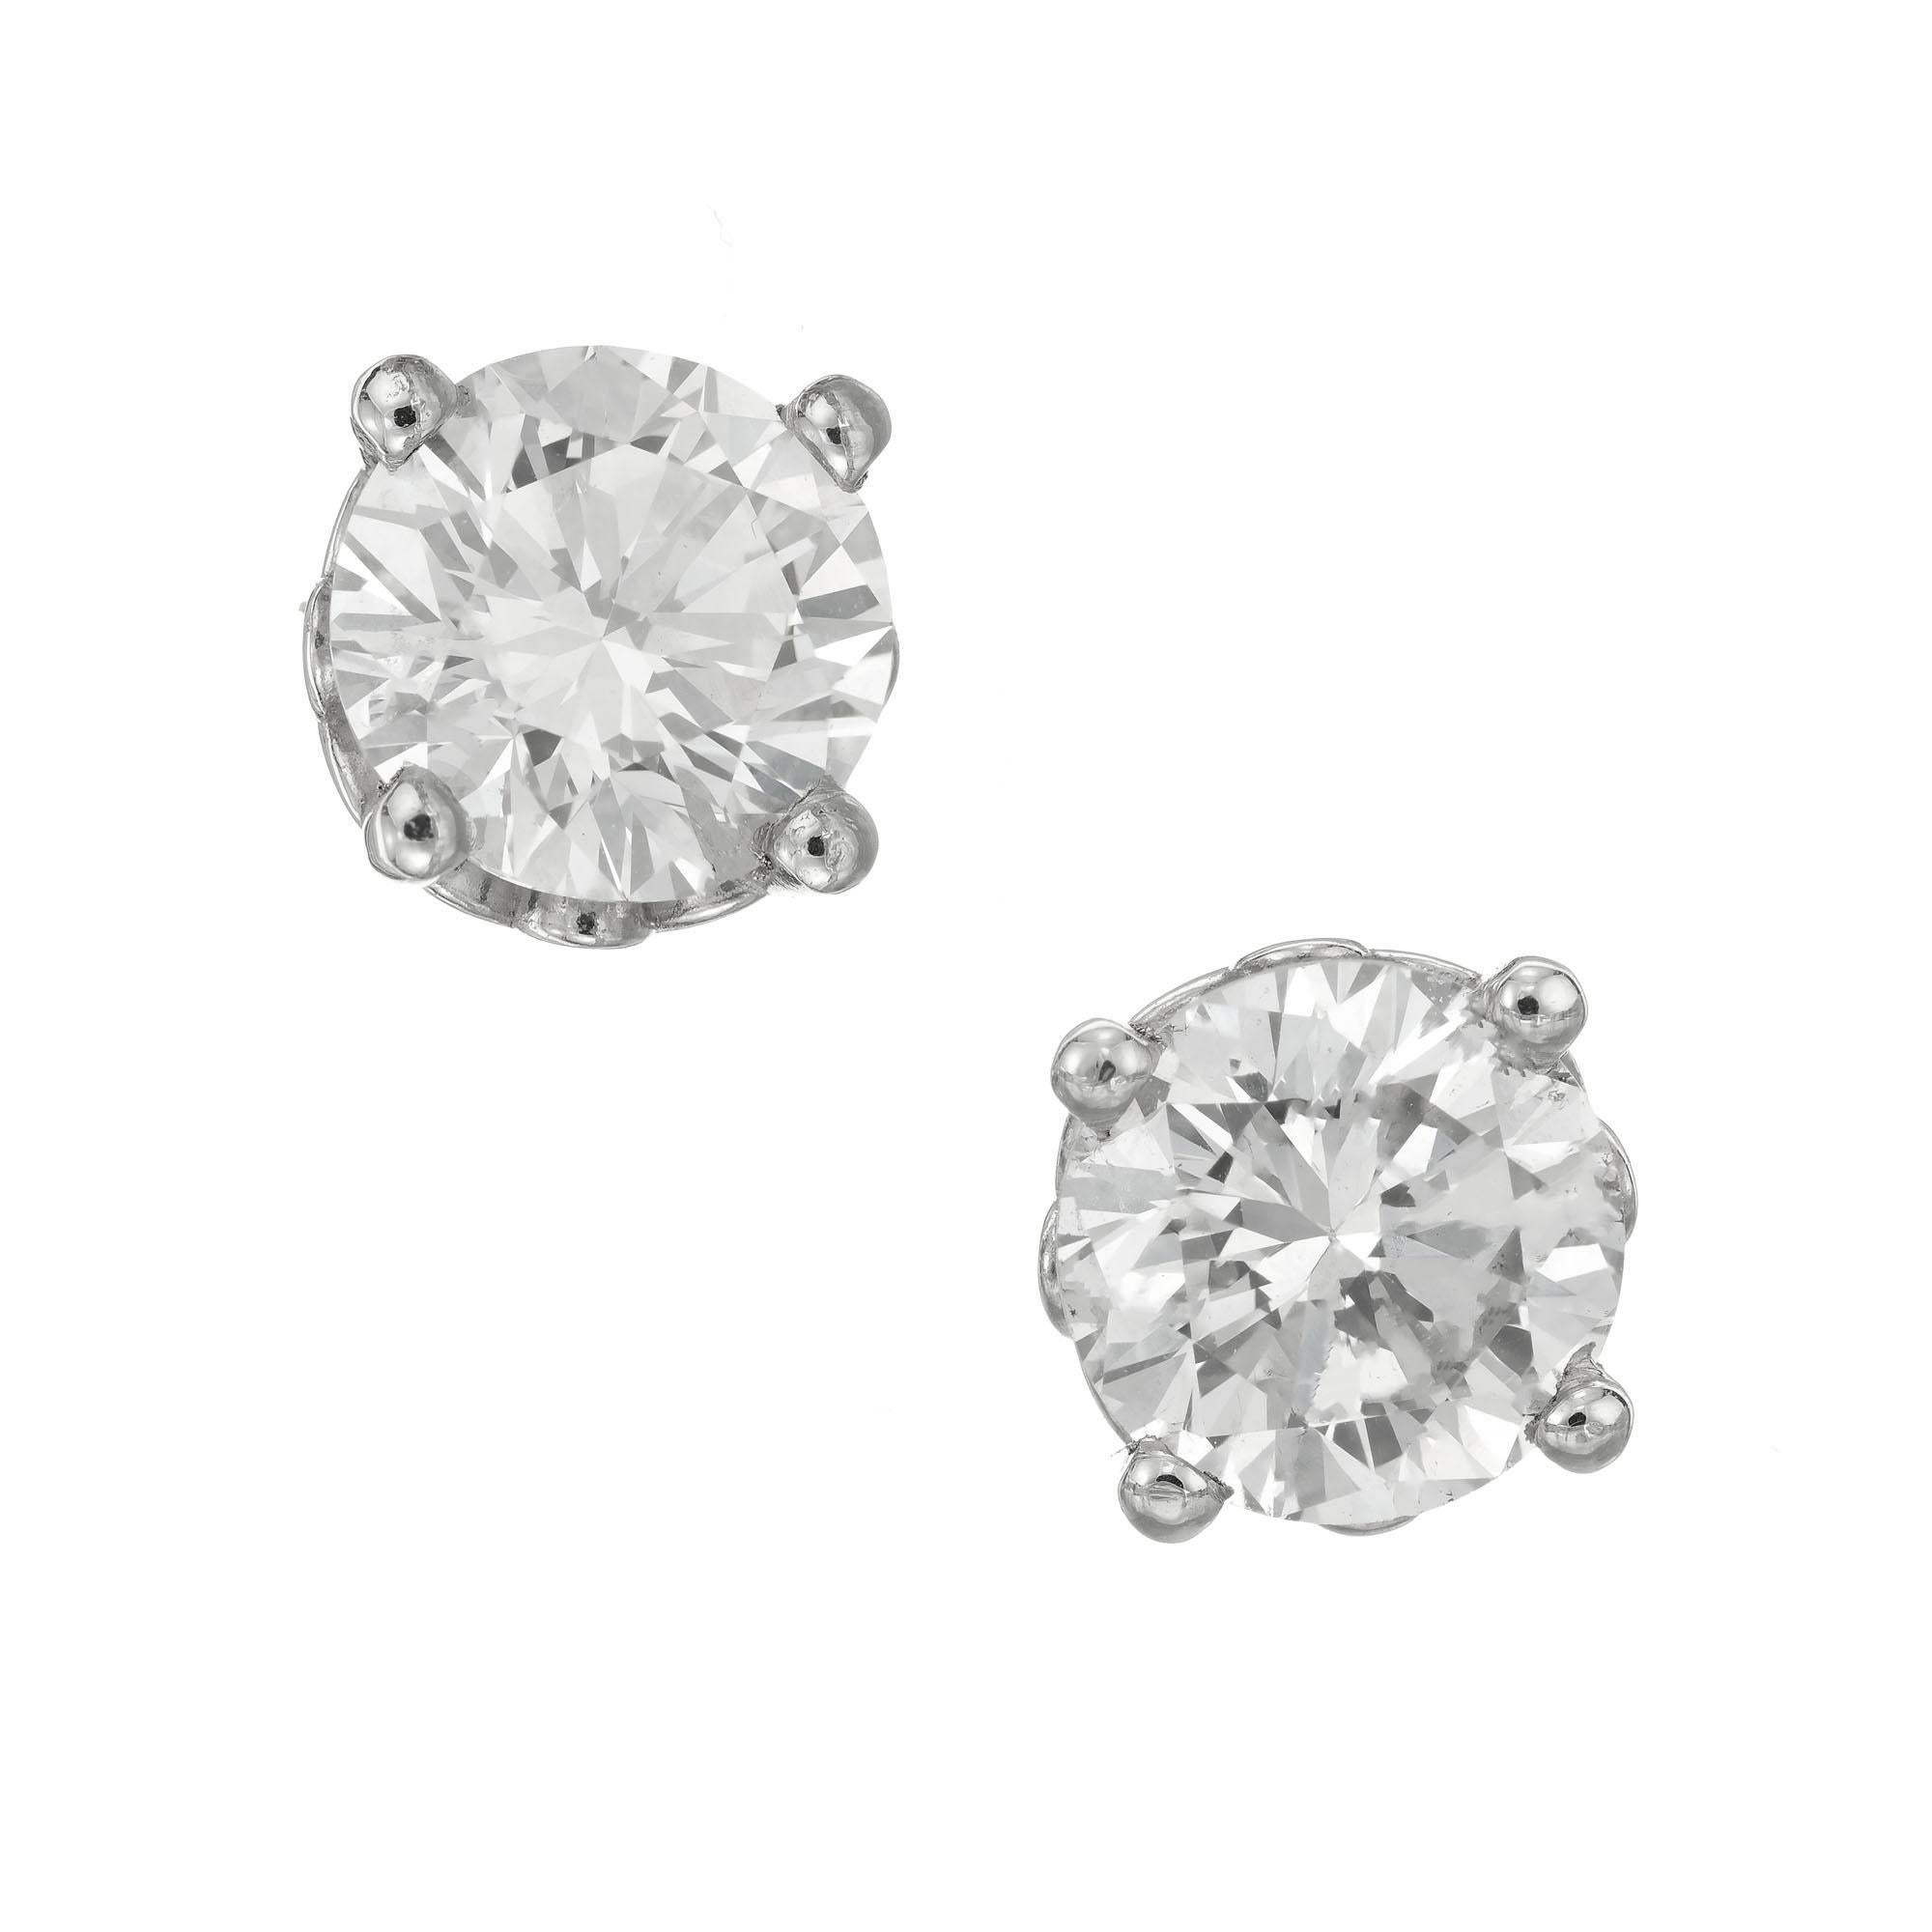 Round diamond stud earrings. 2 GIA certified round brilliant cut diamonds in platinum, 4 prong scroll basket settings. Created in the Peter Suchy Workshop. 

1 round brilliant cut diamond. Approx. total weight: .75cts L, I1  5.91x5.87x3.5mm. GIA